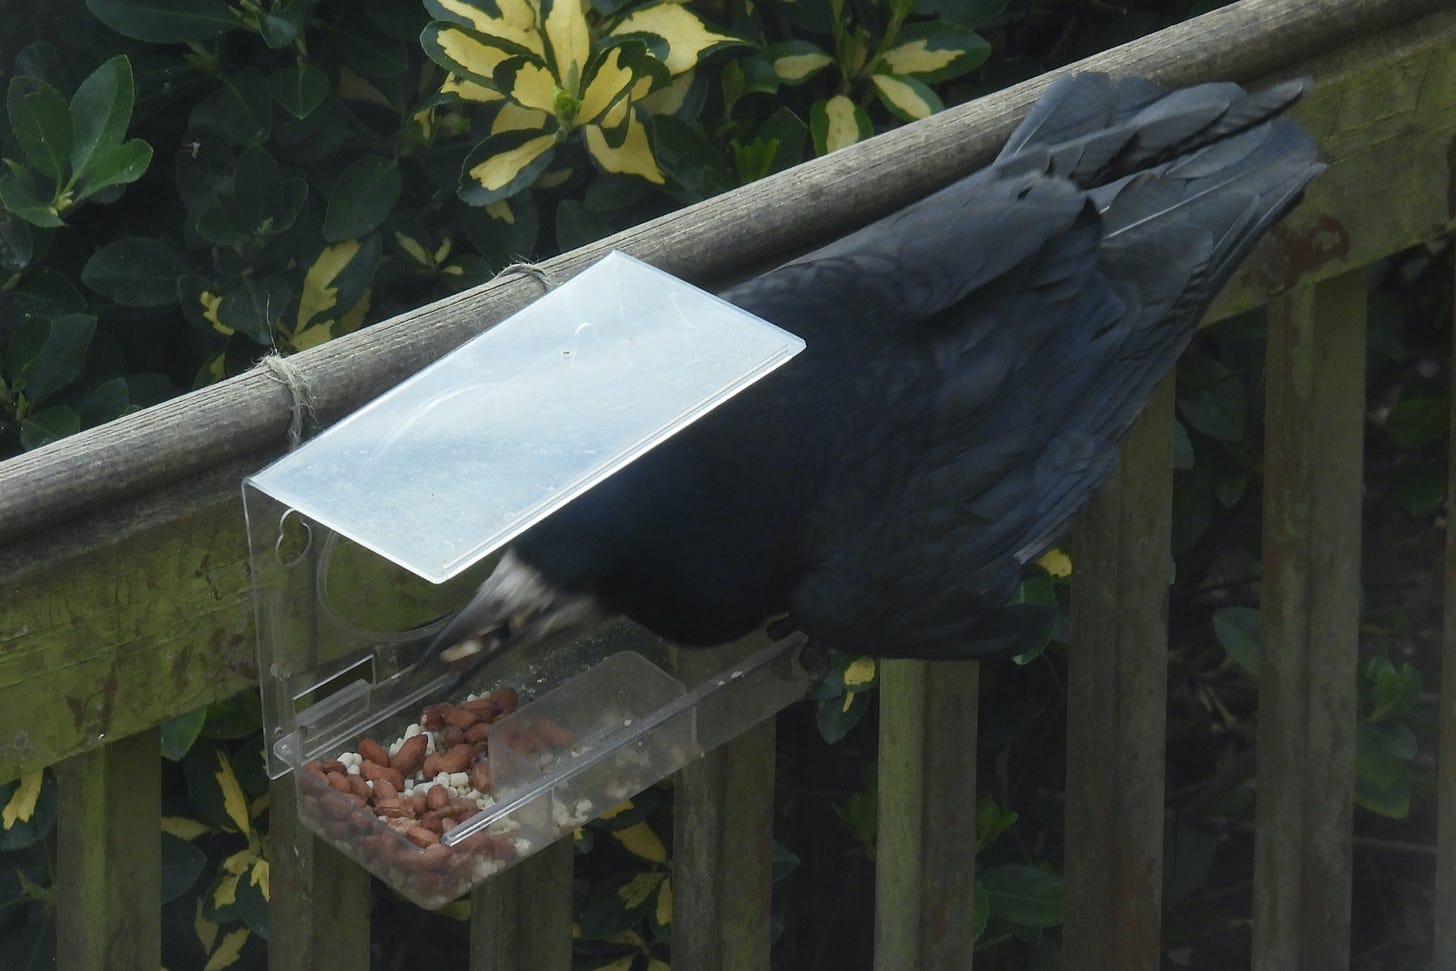 Rook taking peanuts from small feeder